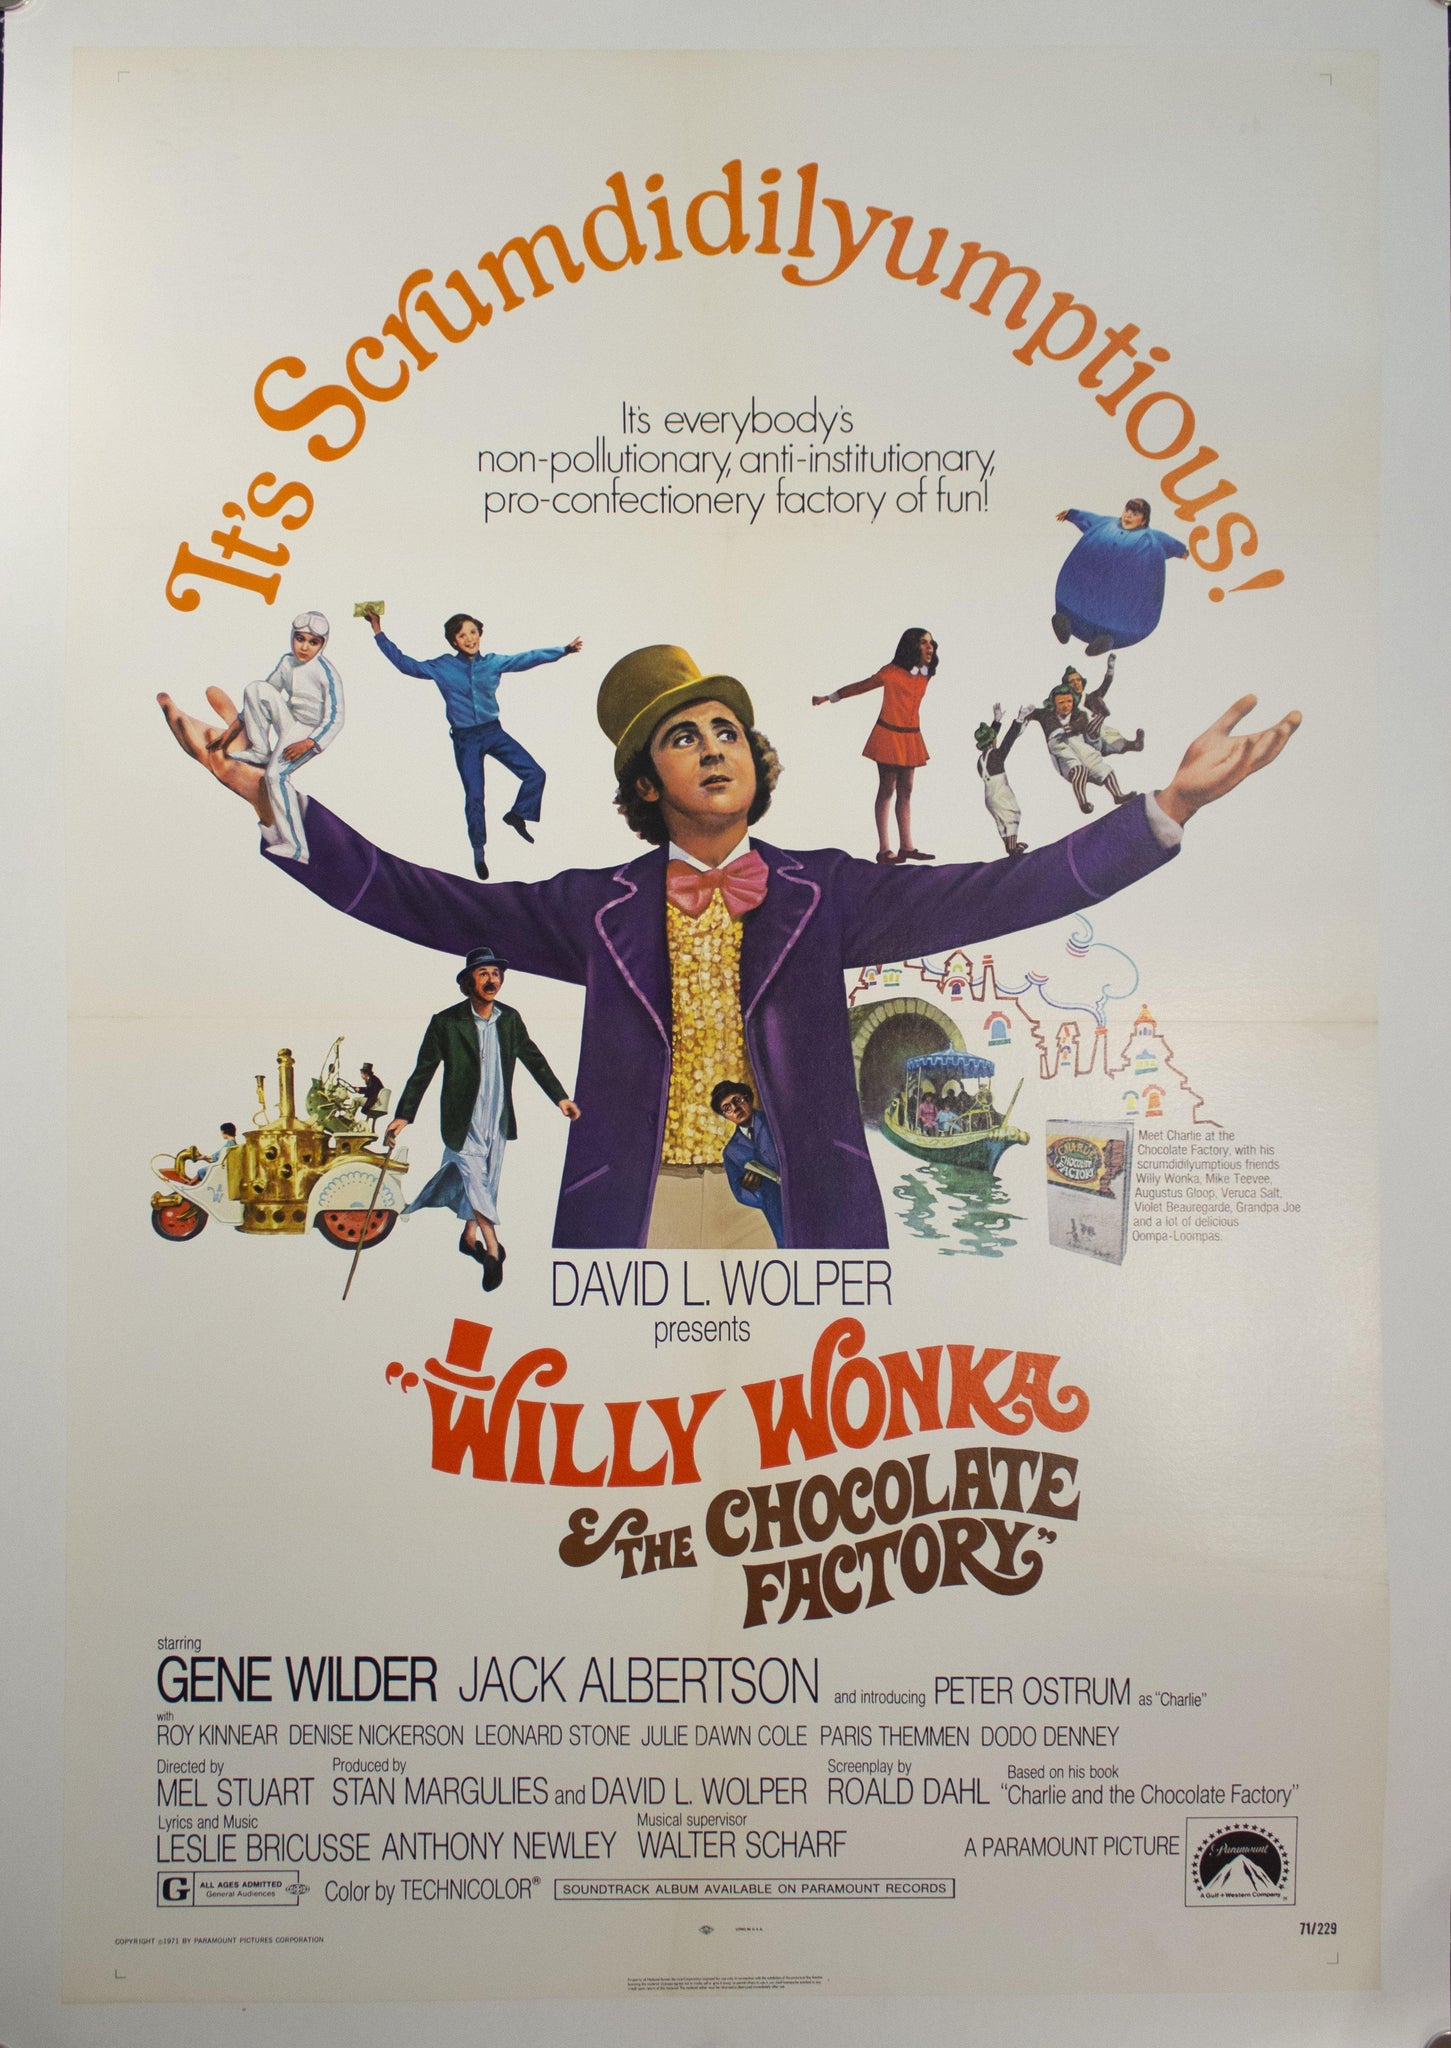 1971 Willie Wonka & The Chocolate Factory - Golden Age Posters